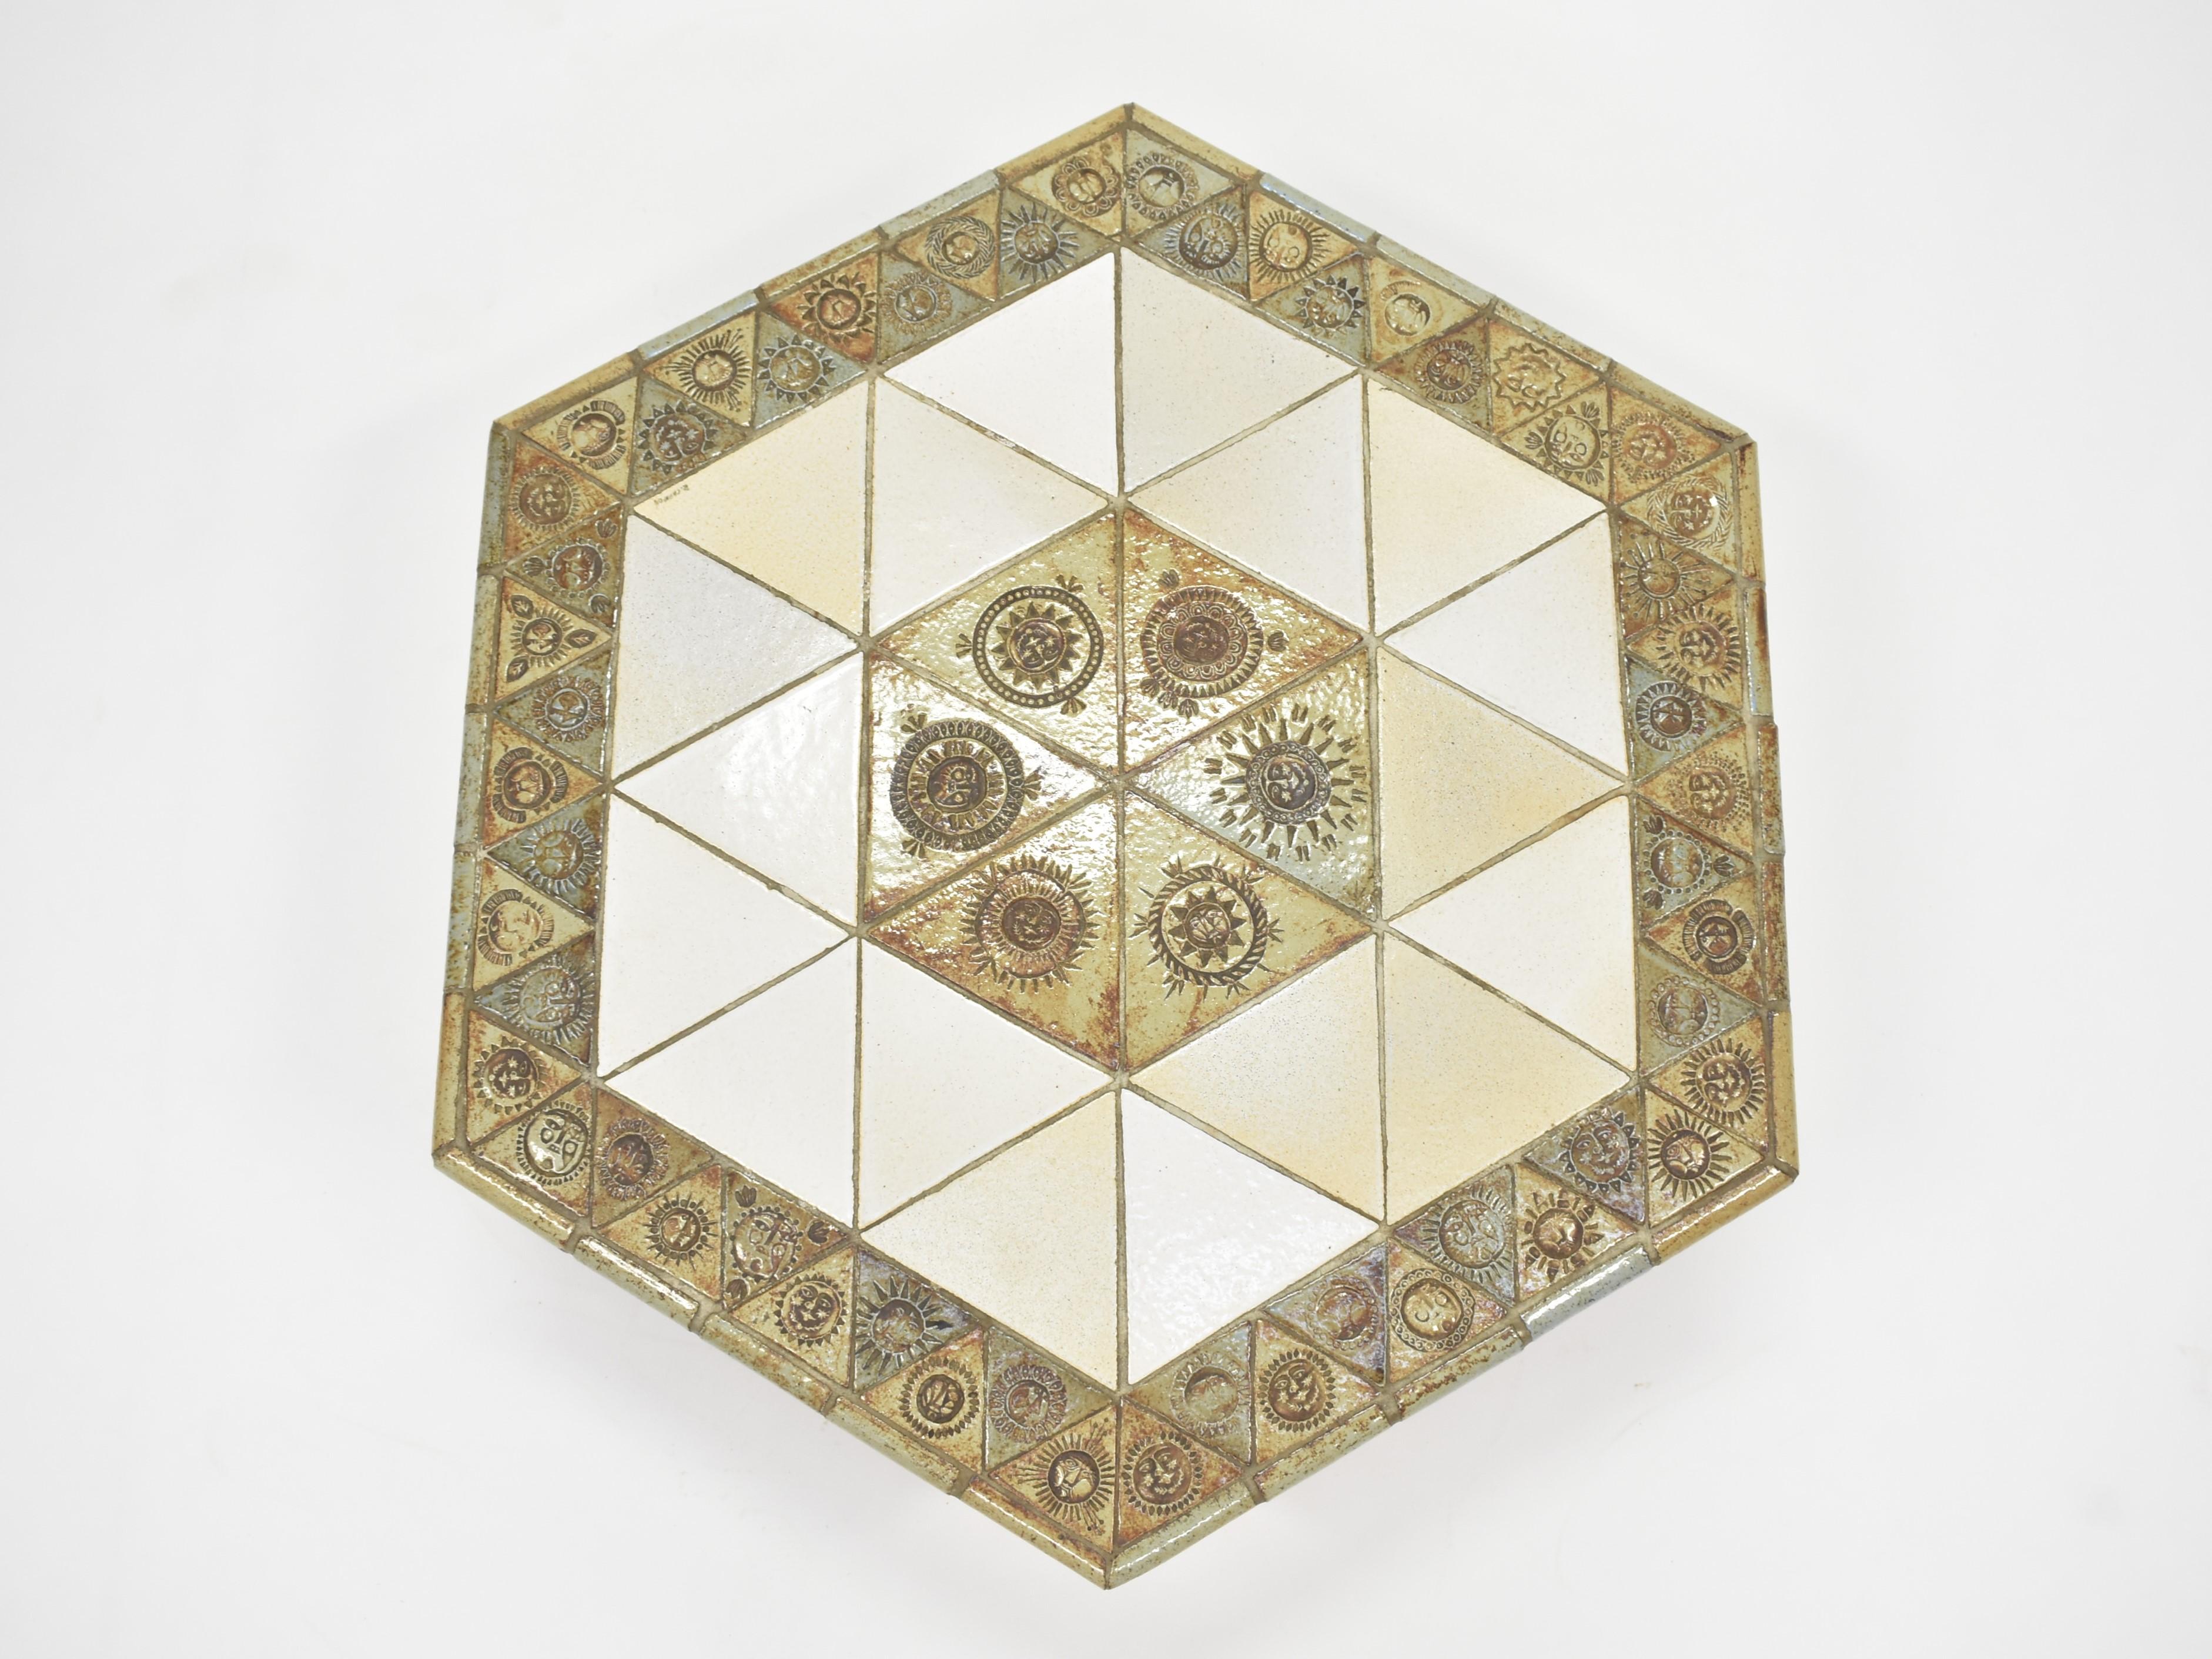 Roger Capron walnut and ceramic tile octagonal coffee table. The triangular tiles are likely Garrigue, which Capron used frequently. The four round legs are constructed of walnut. 